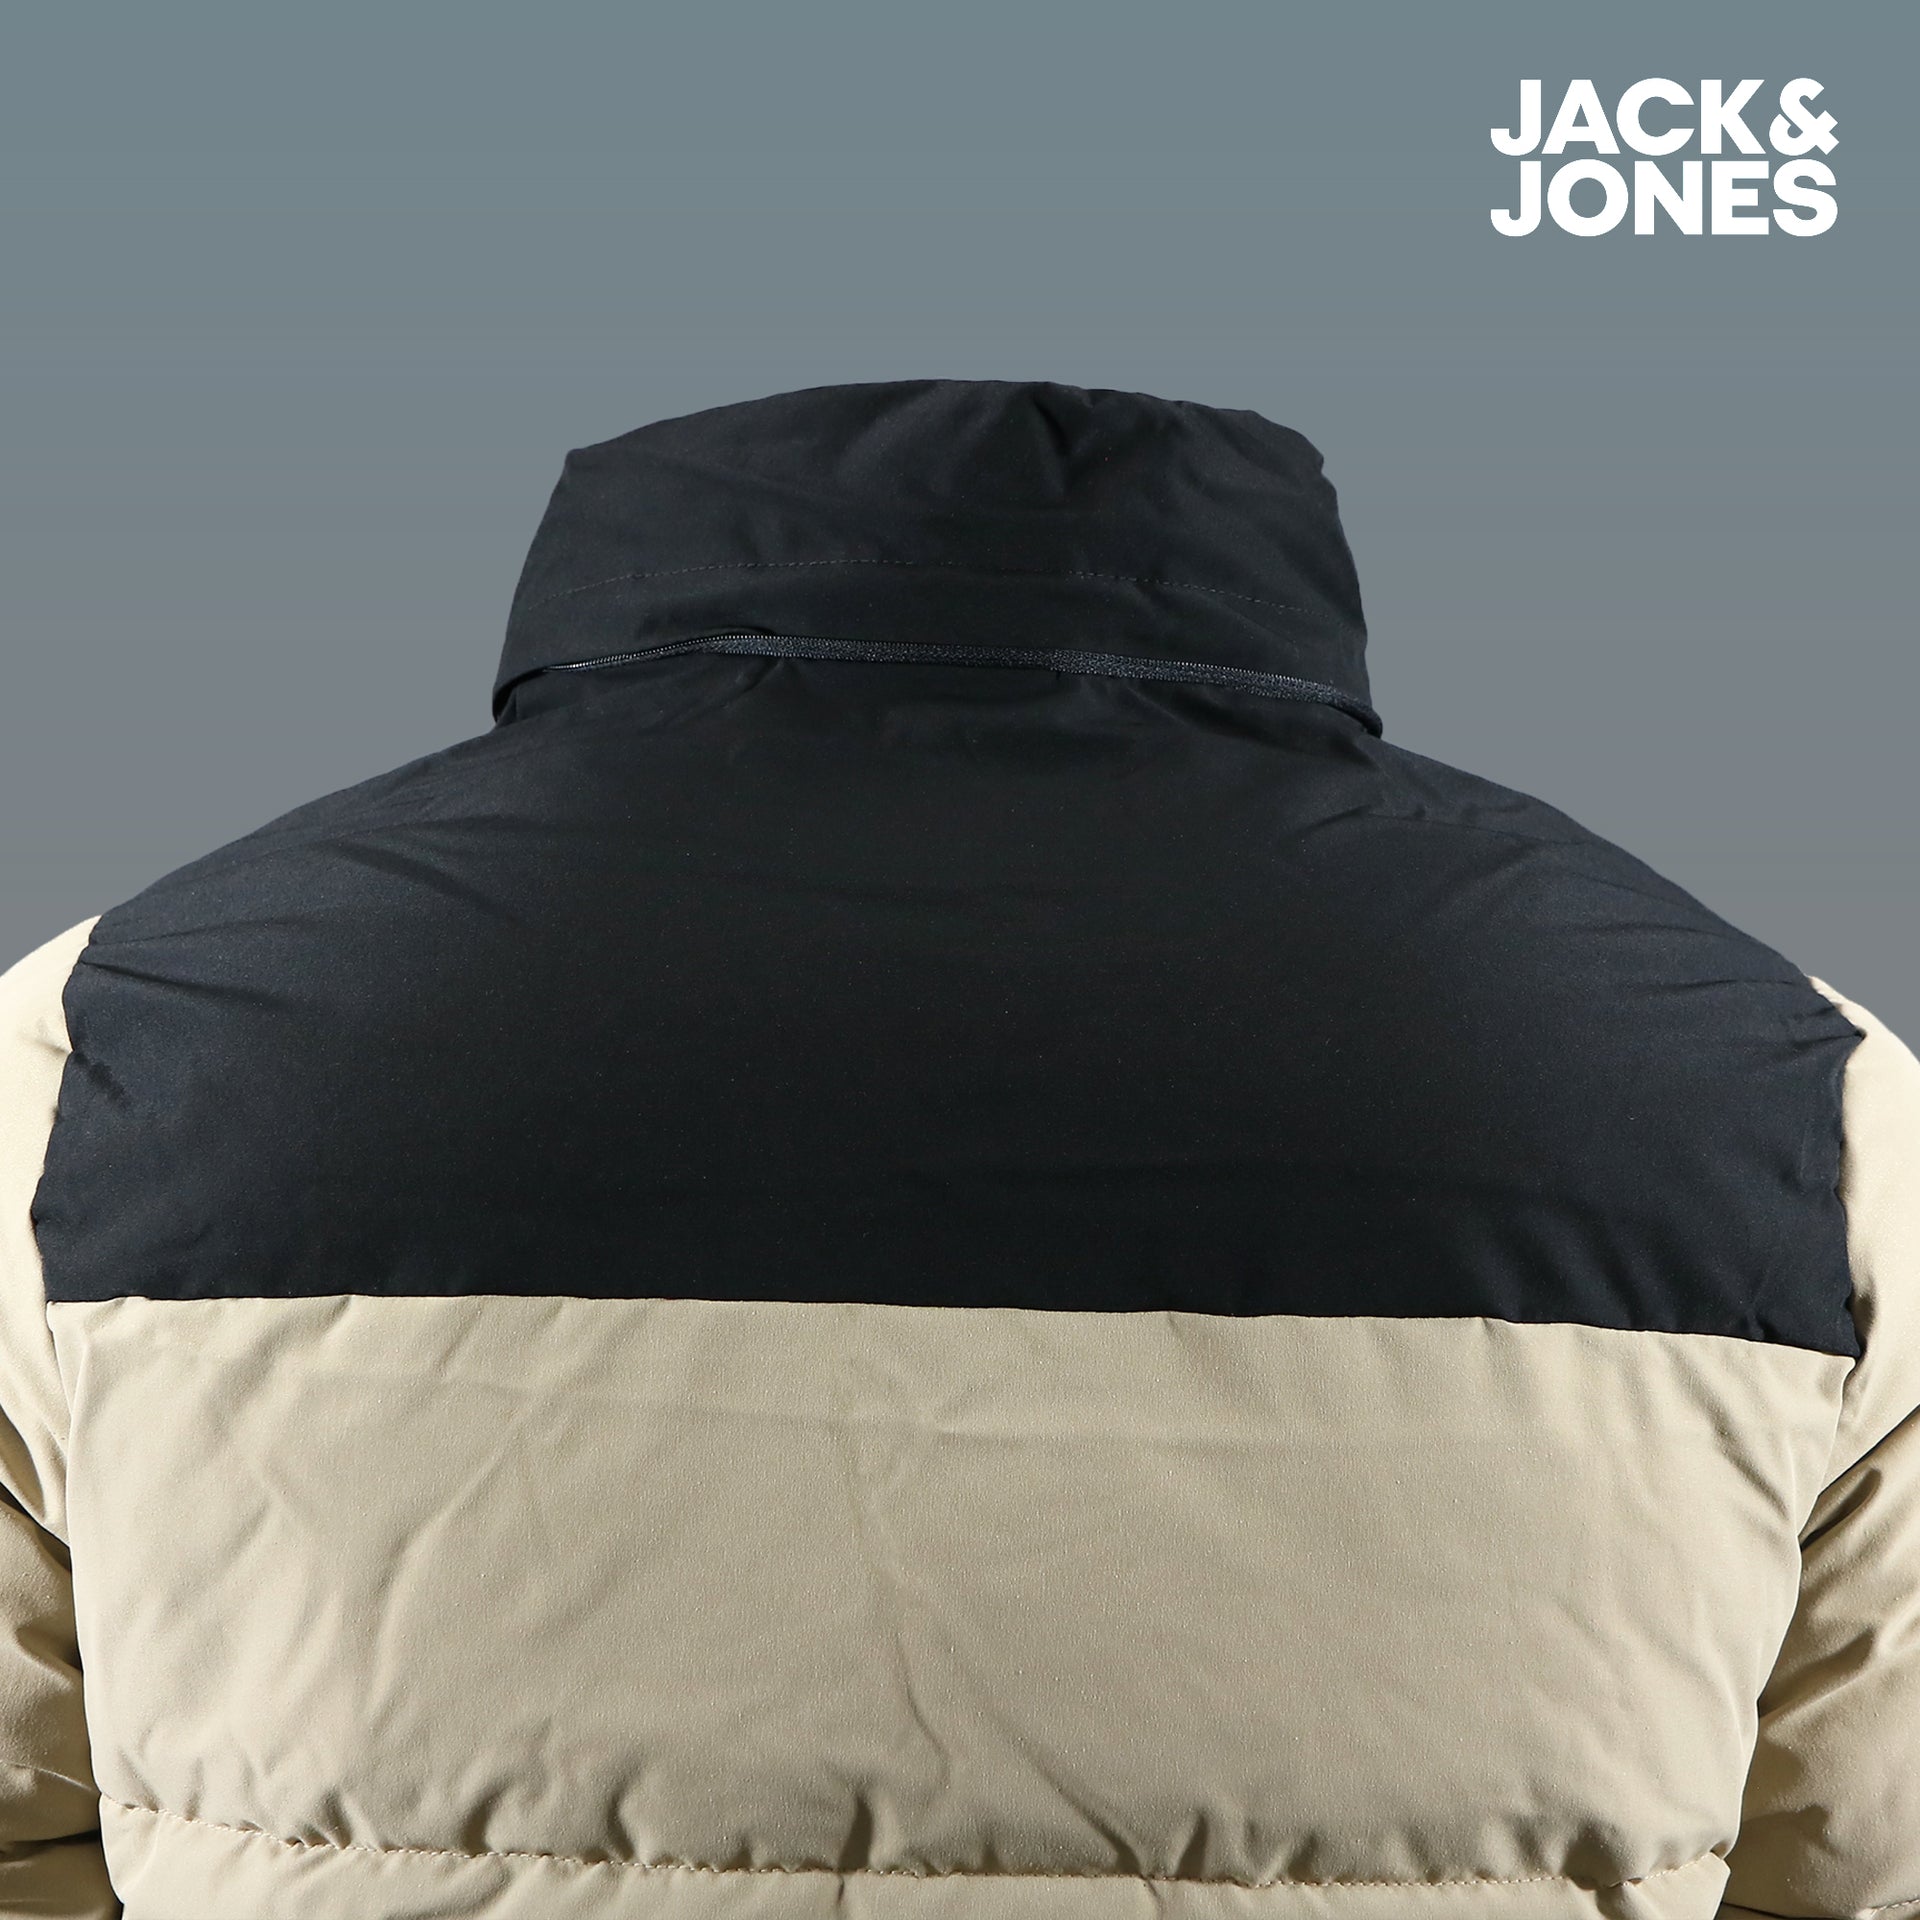 The backside of the Jack And Jones Dune Puffer Jacket With Hidden Pocket | Black and Tan Puffer Jacket without the hood